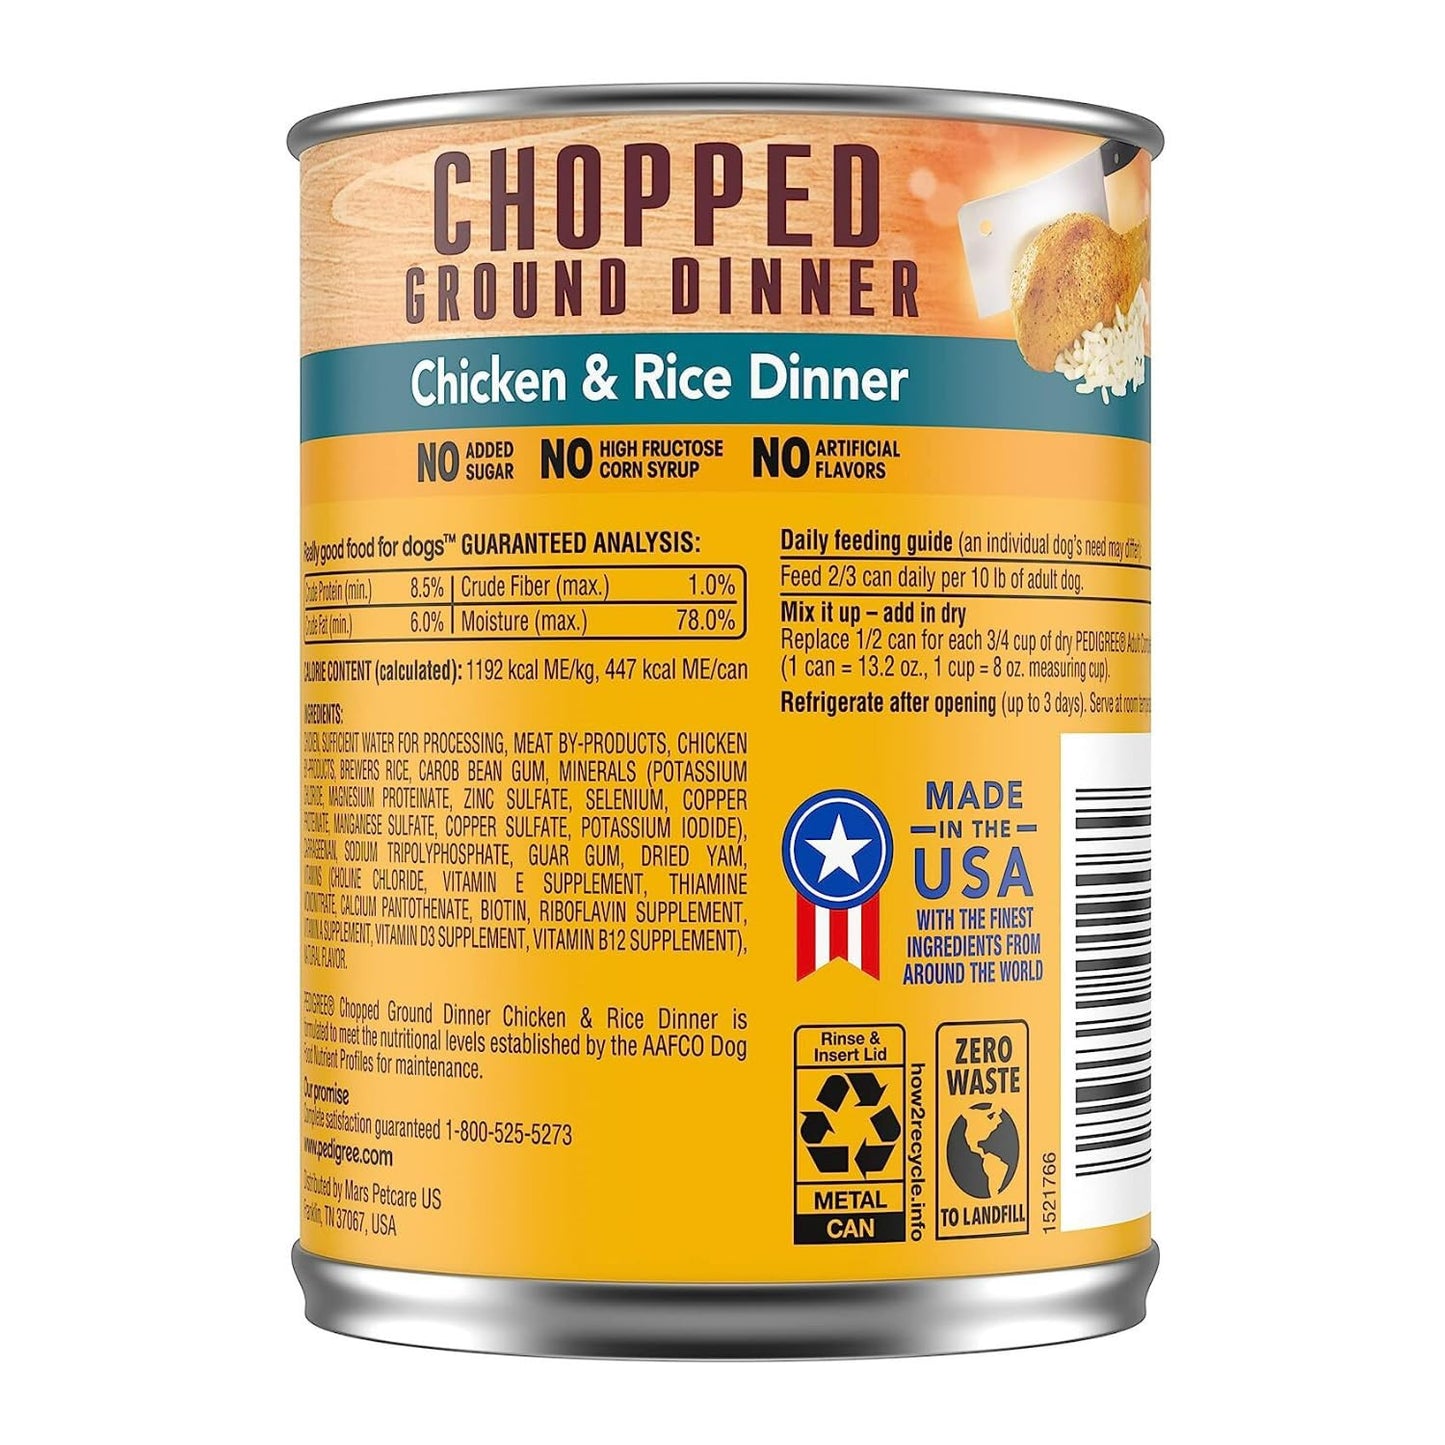 Pedigree Chopped Ground Dinner Chicken & Rice Canned Dog Food 13.2 Ounces